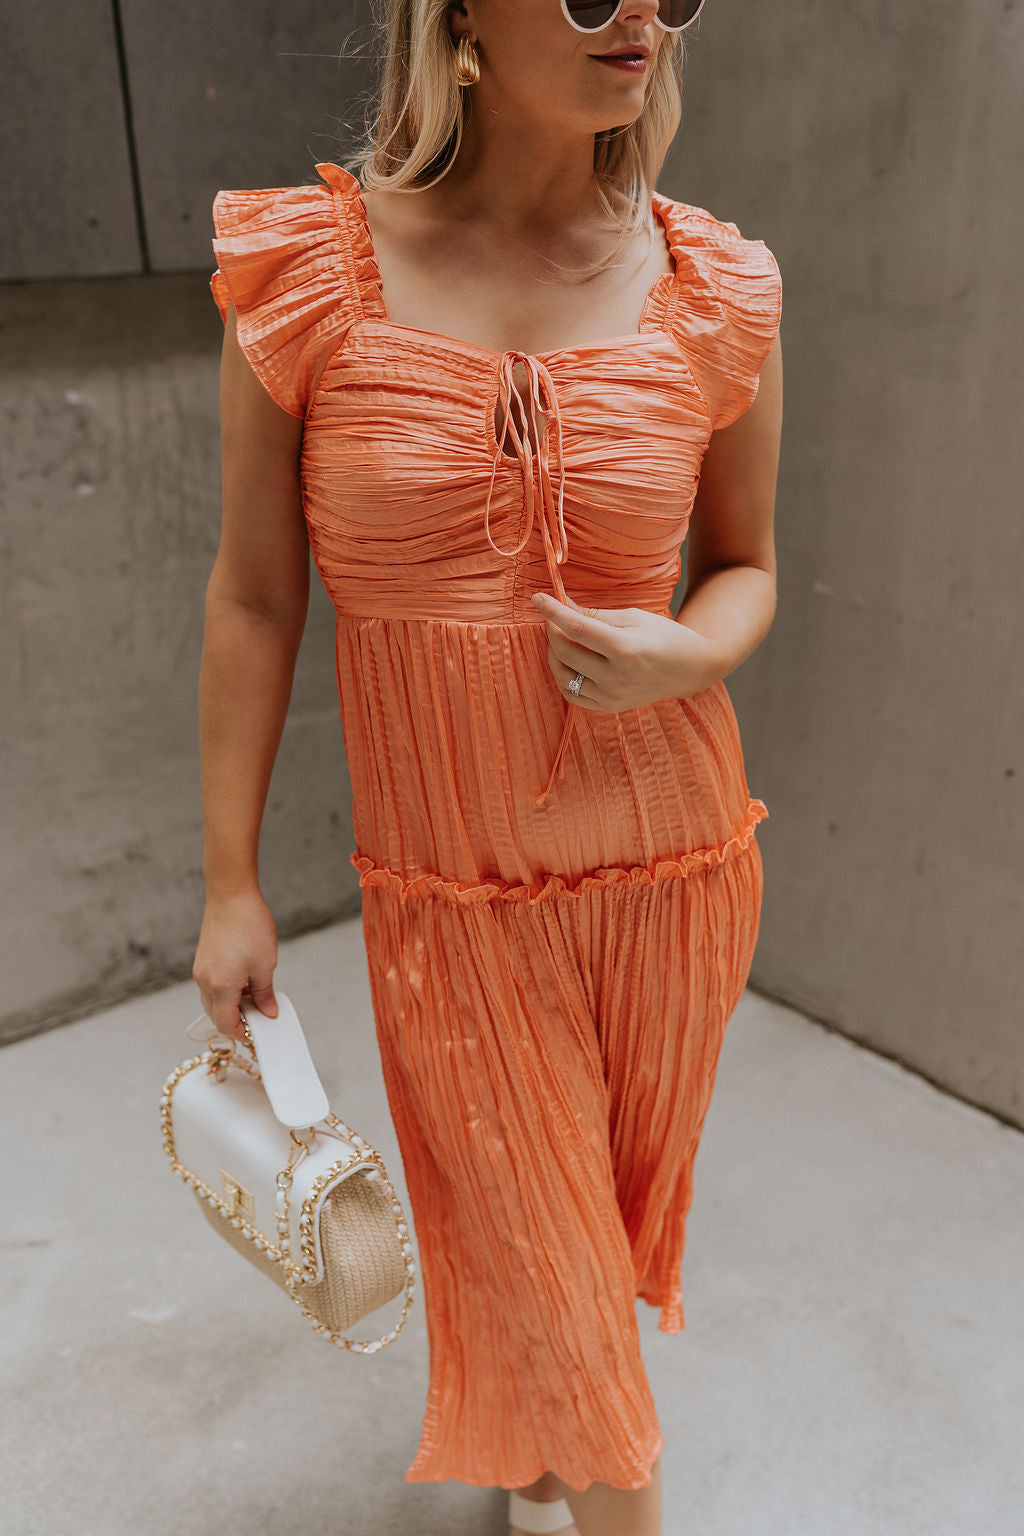 Close up view of female model wearing the Maren Peach Key Hole Midi Dress which features Peach Crinkle Fabric, Midi Length, Peach Lining, Square Neckline with Key Hole Tie Closure, Ruffle Straps andTier Ruffle Skirt Detail